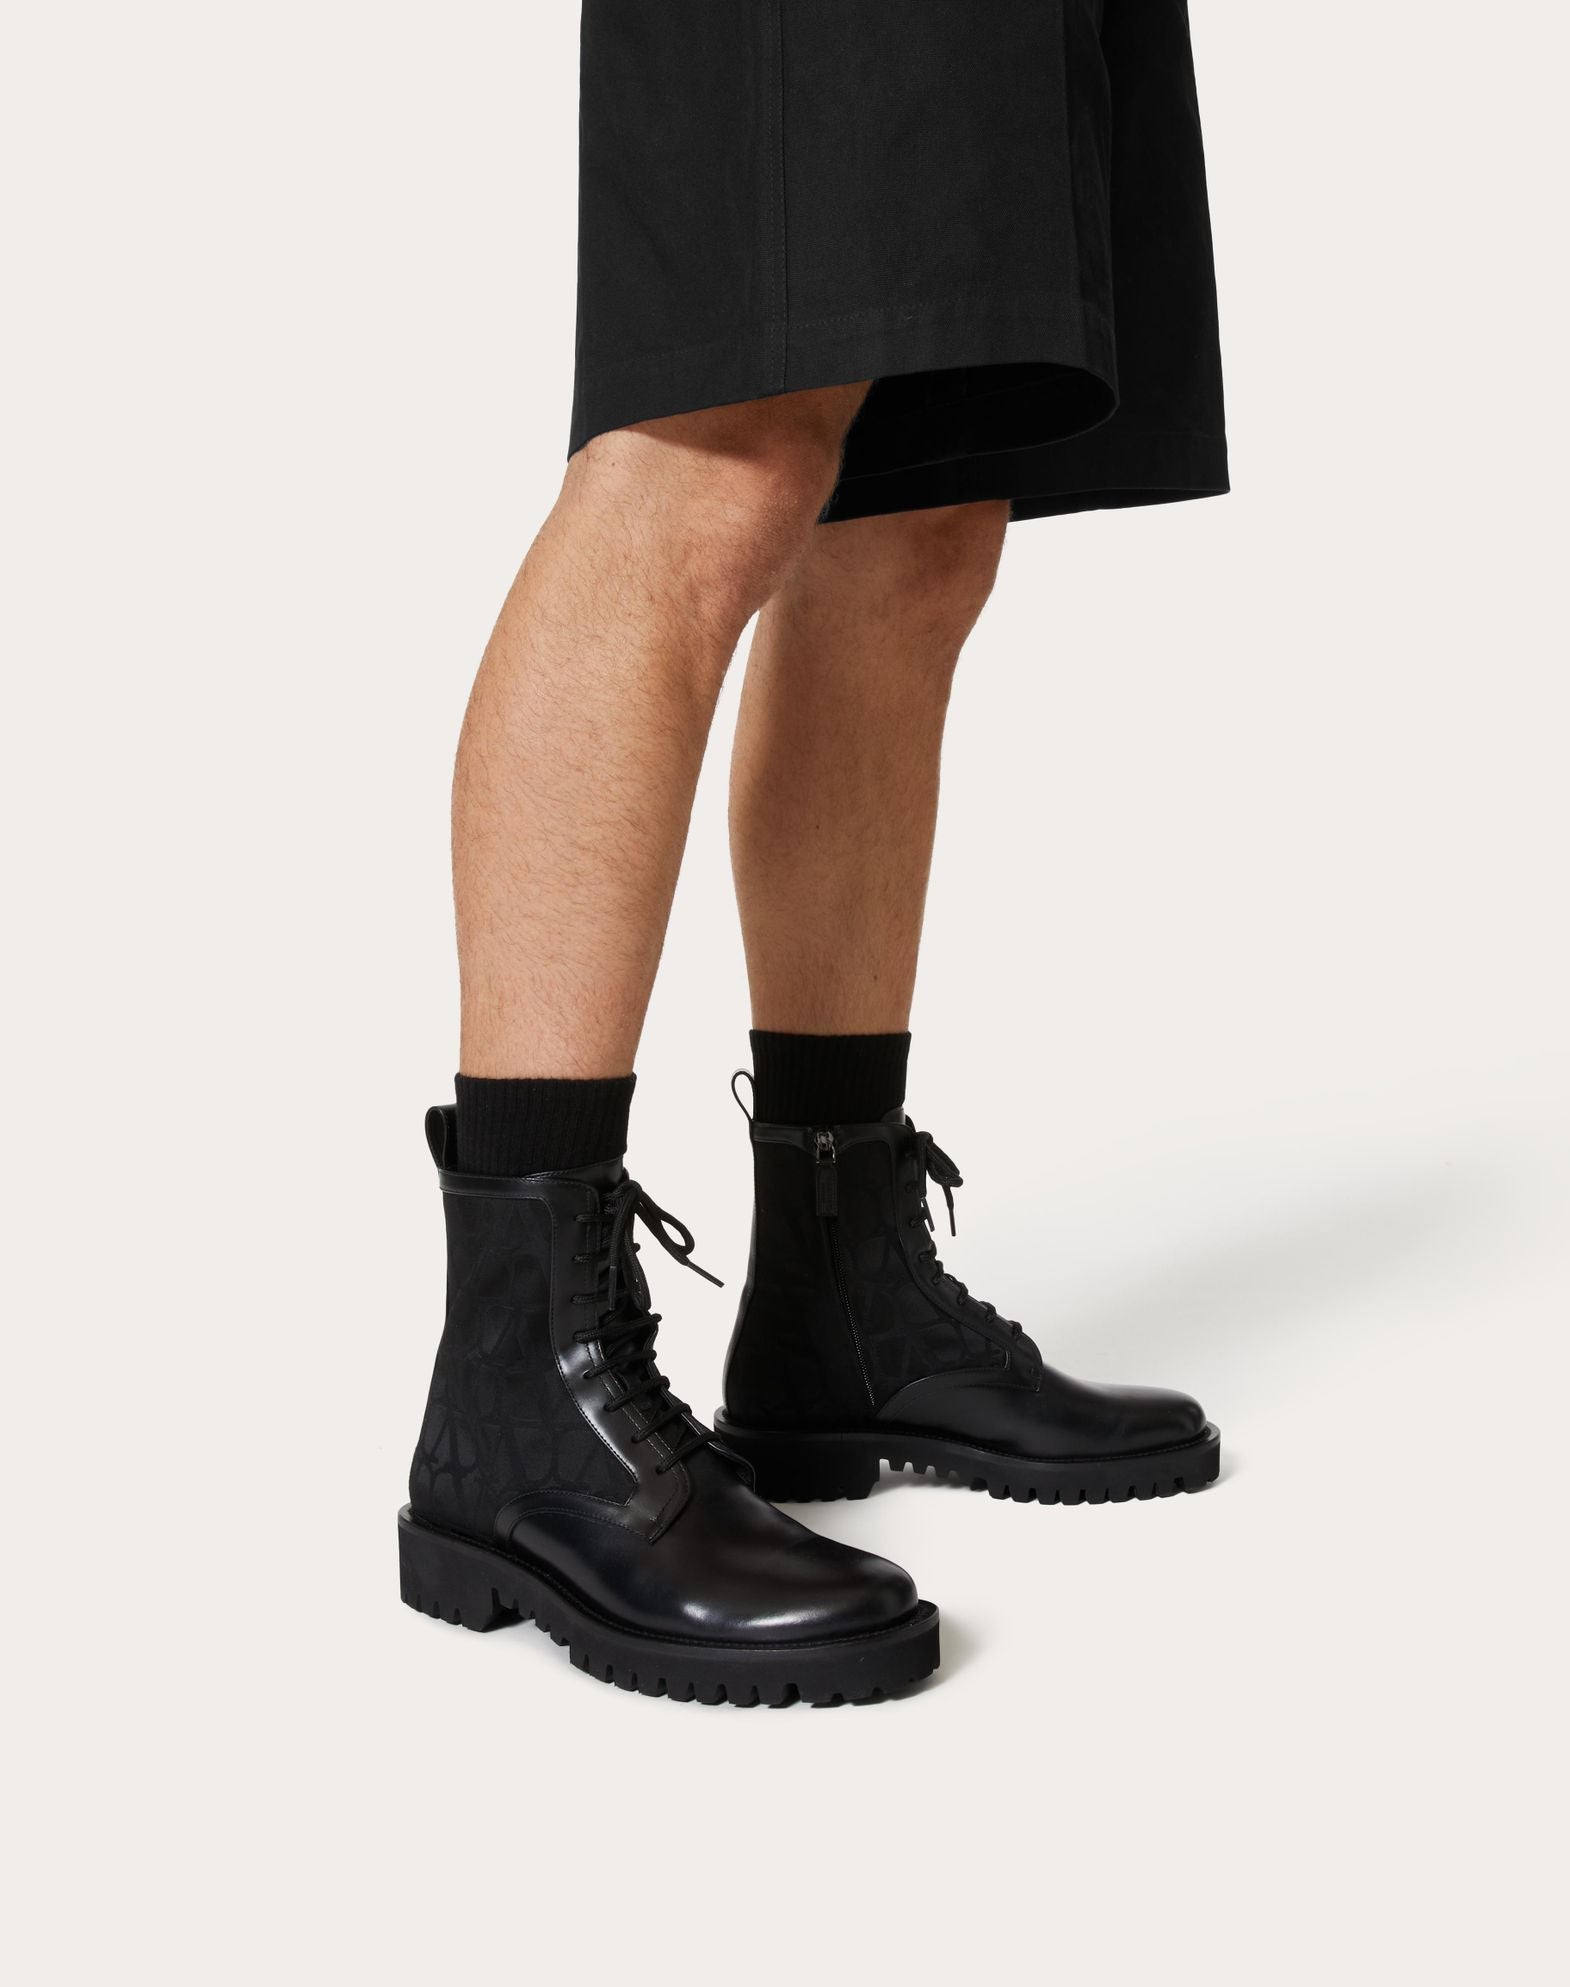 Toile Iconographe Combat Boot In Toile Iconographe Technical Fabric And Calfskin